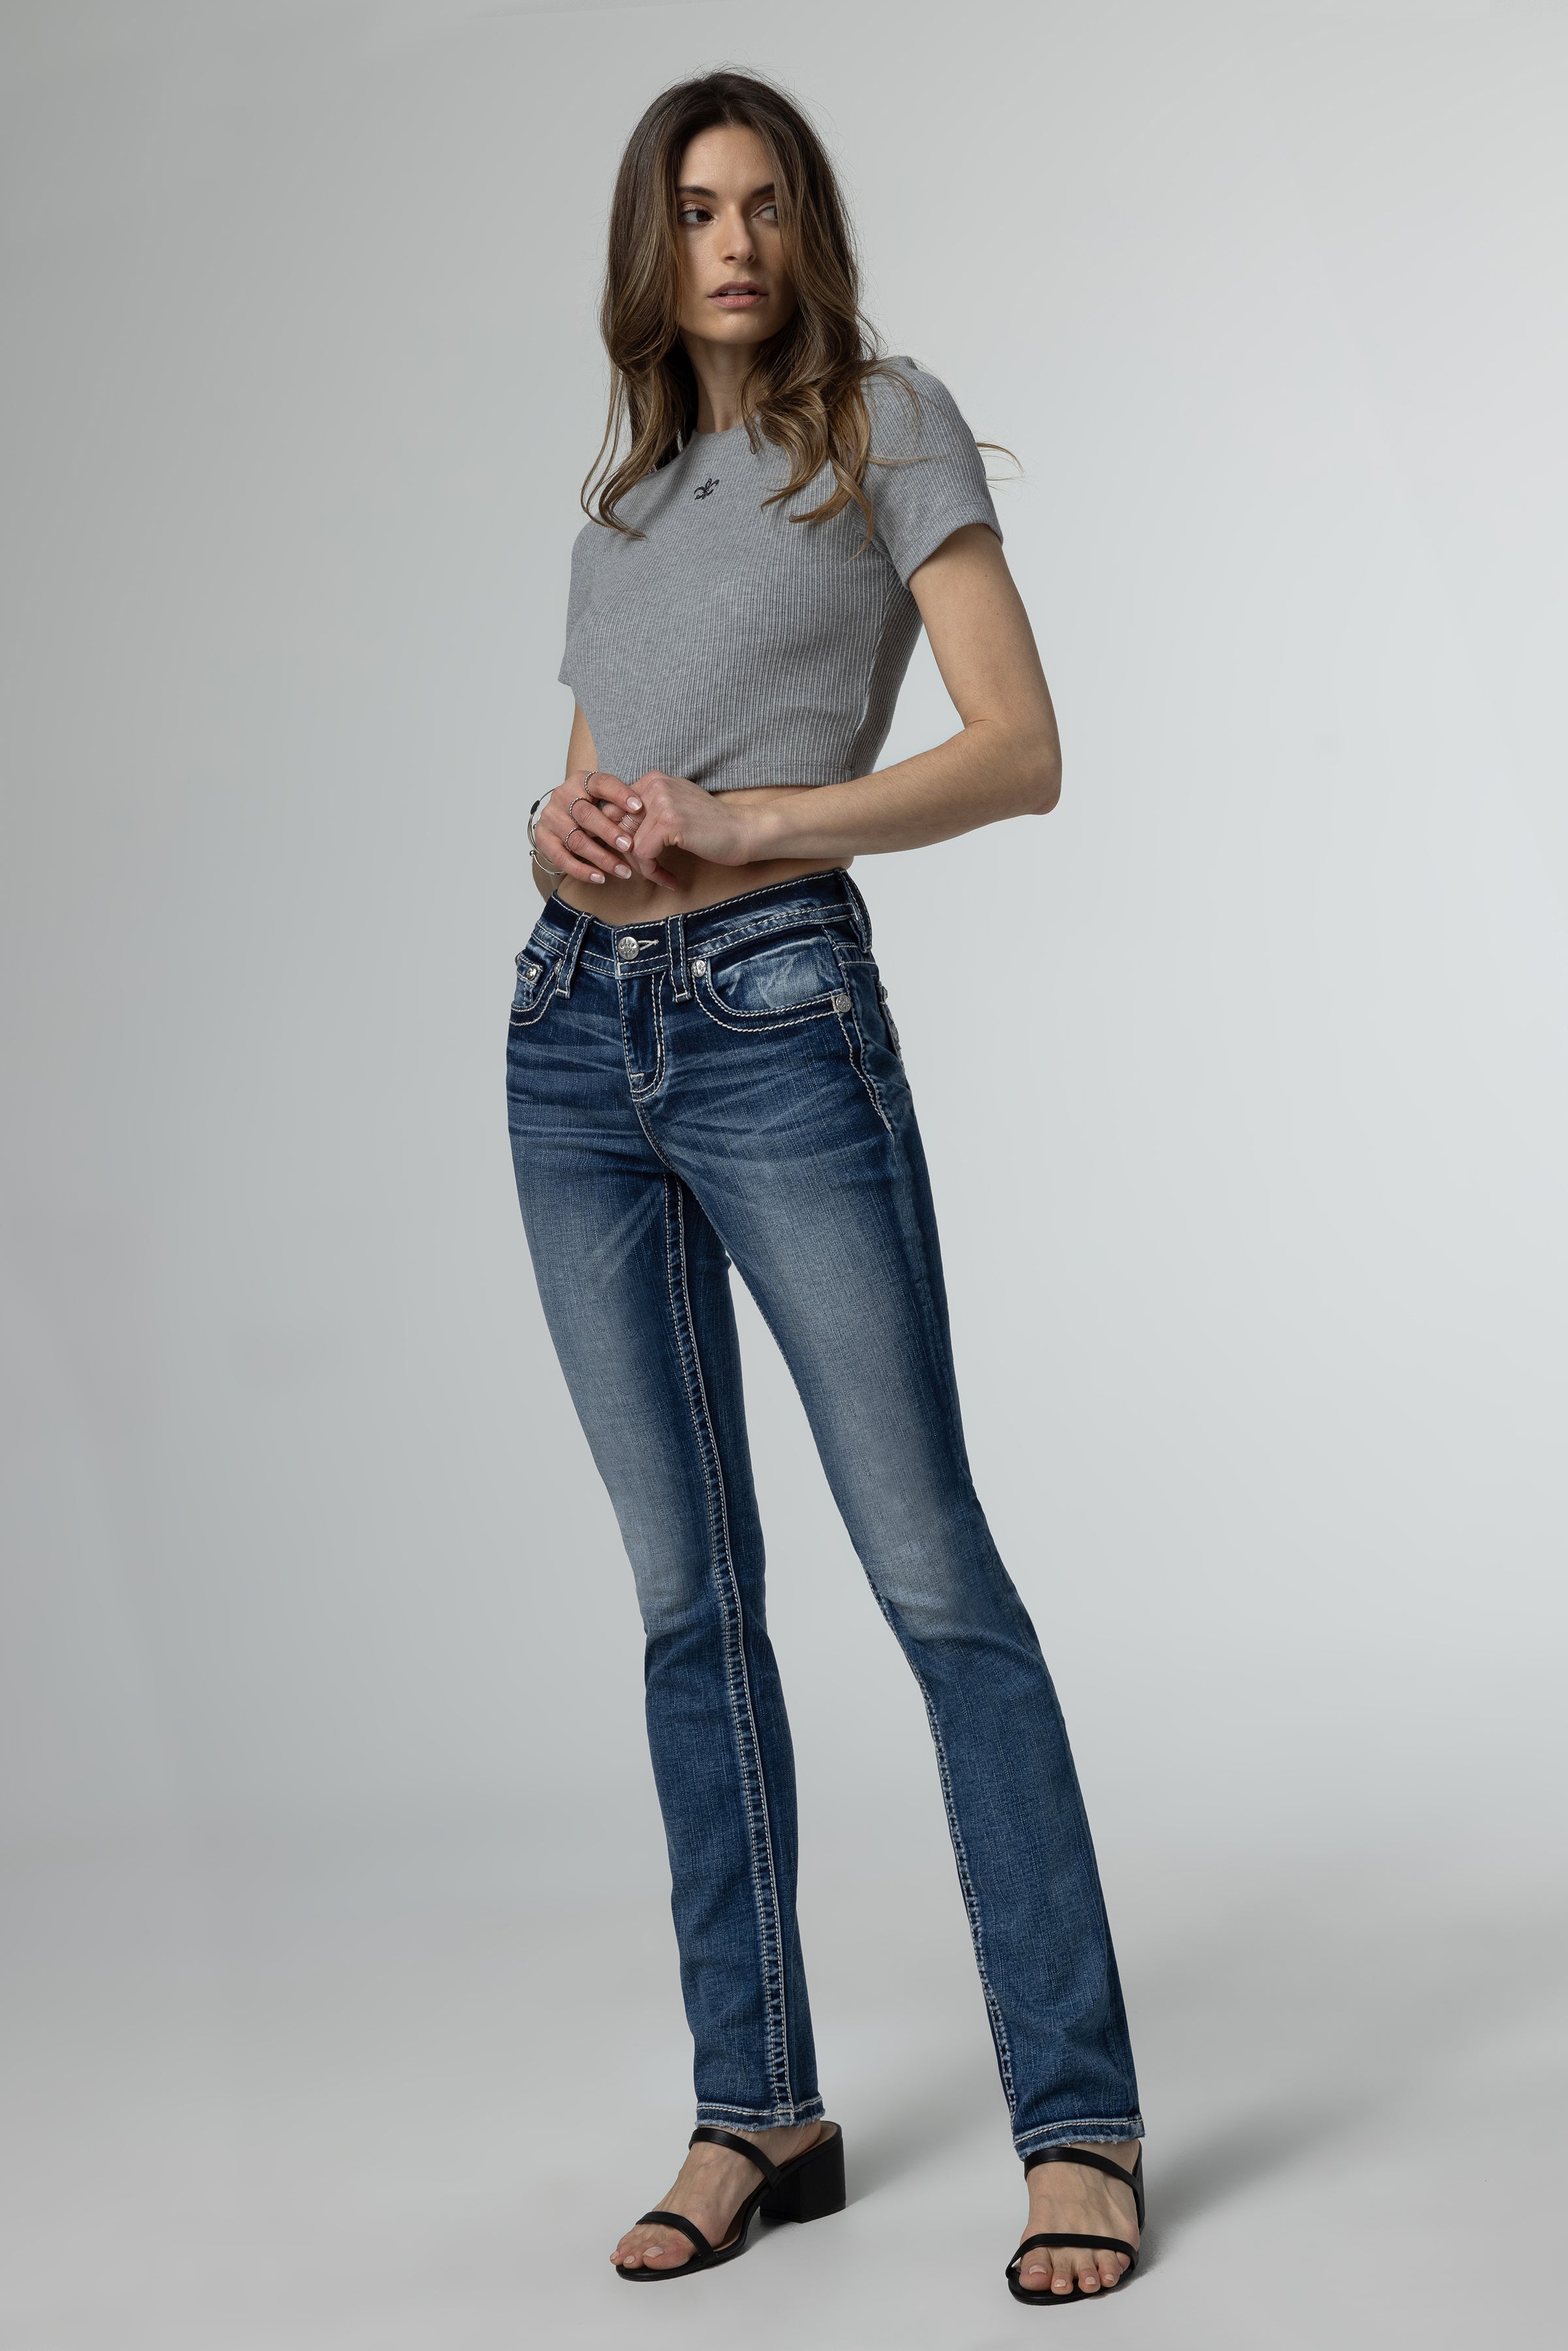 Fleur Glass Straight Jeans | Only $119.00